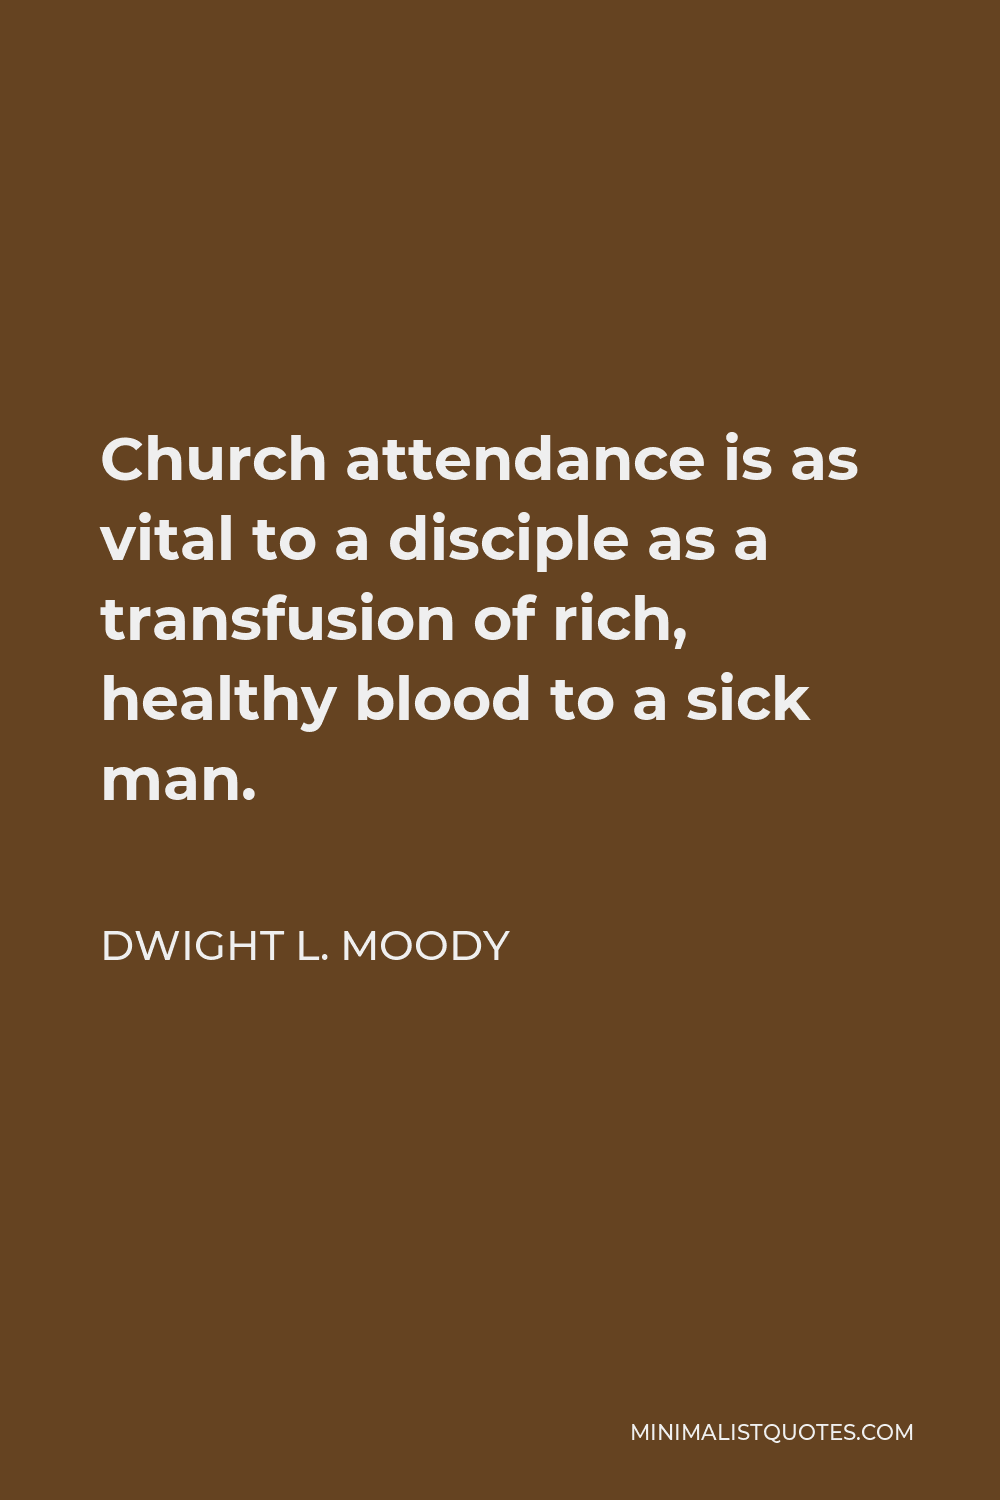 Dwight L. Moody Quote - Church attendance is as vital to a disciple as a transfusion of rich, healthy blood to a sick man.